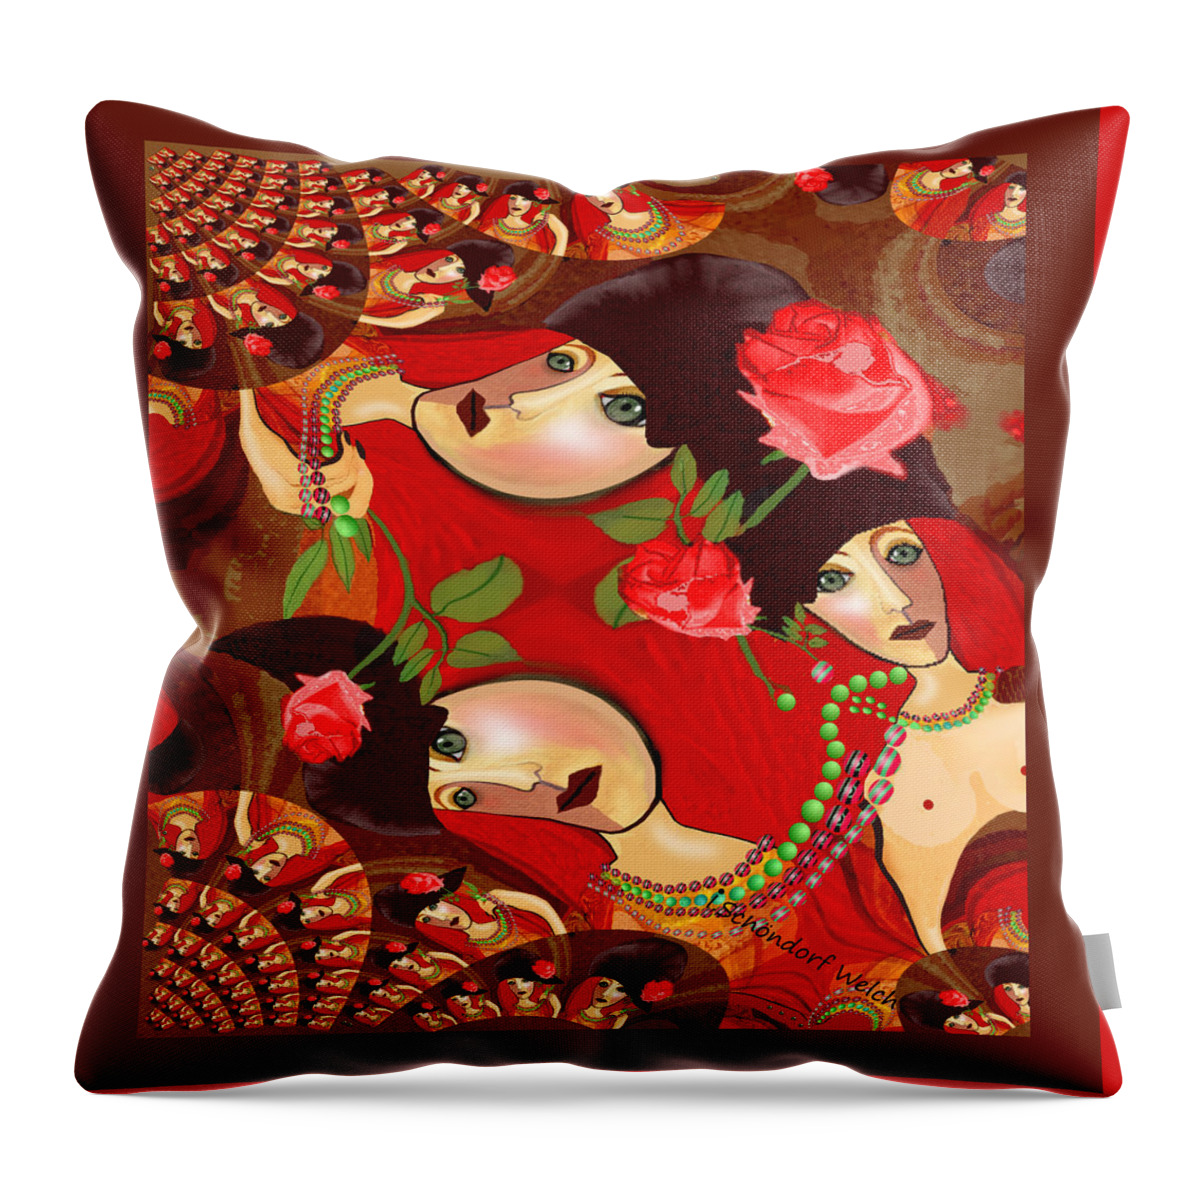 1649 Throw Pillow featuring the digital art 1649 - Female Variety Never Trust A Pretty Face 2017 by Irmgard Schoendorf Welch